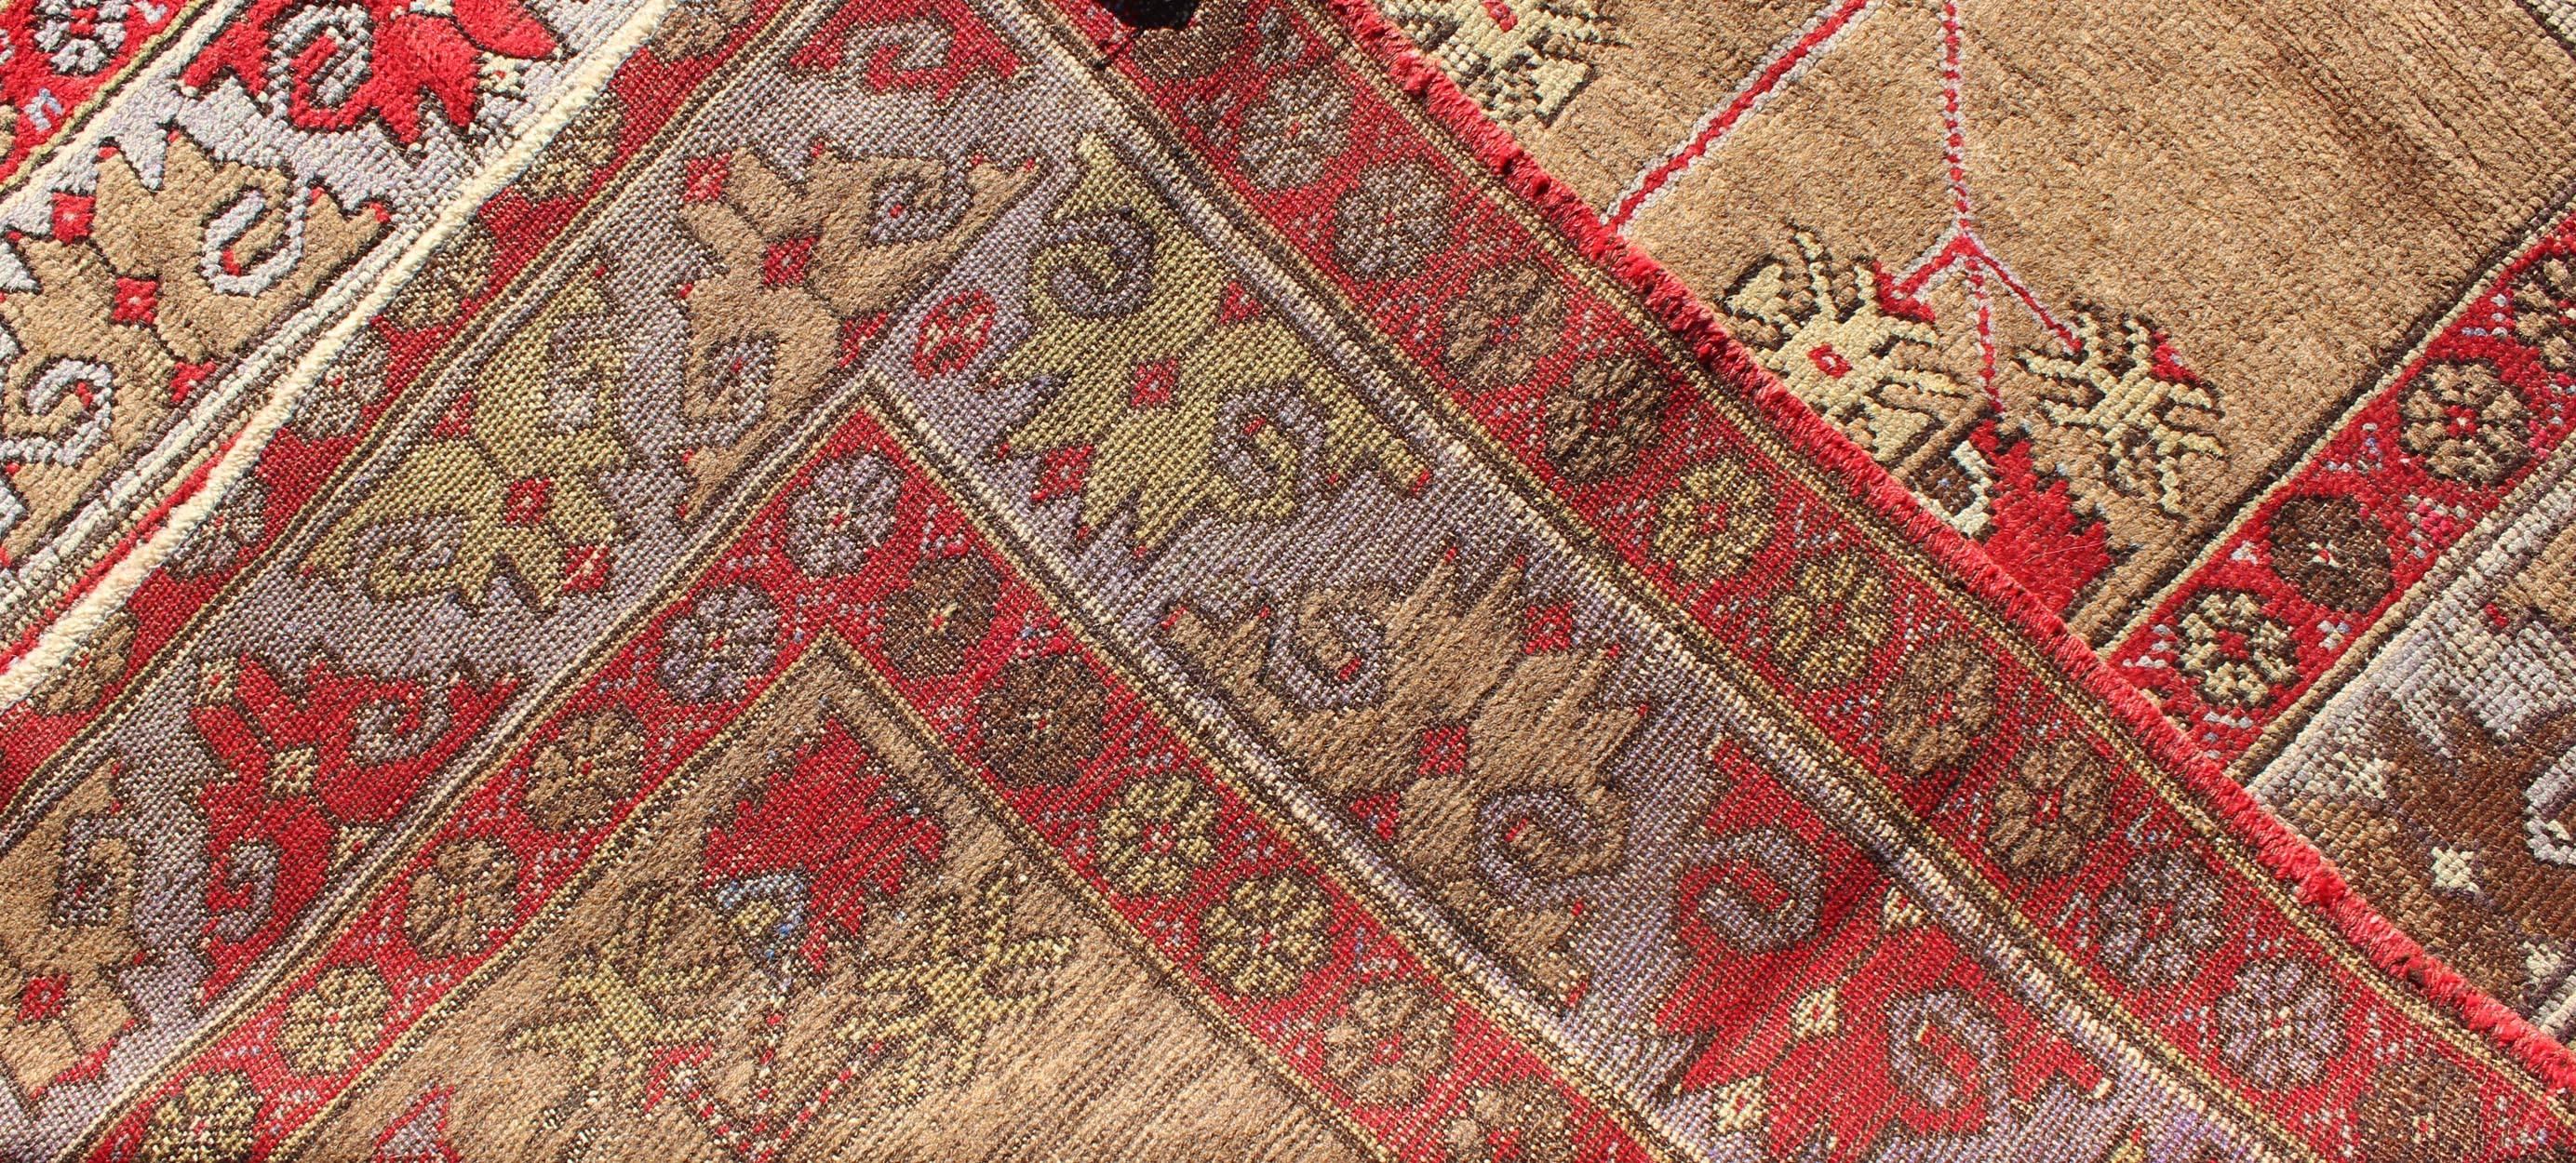 Antique Turkish Oushak Runner in Camel Background, Red & Gray For Sale 1